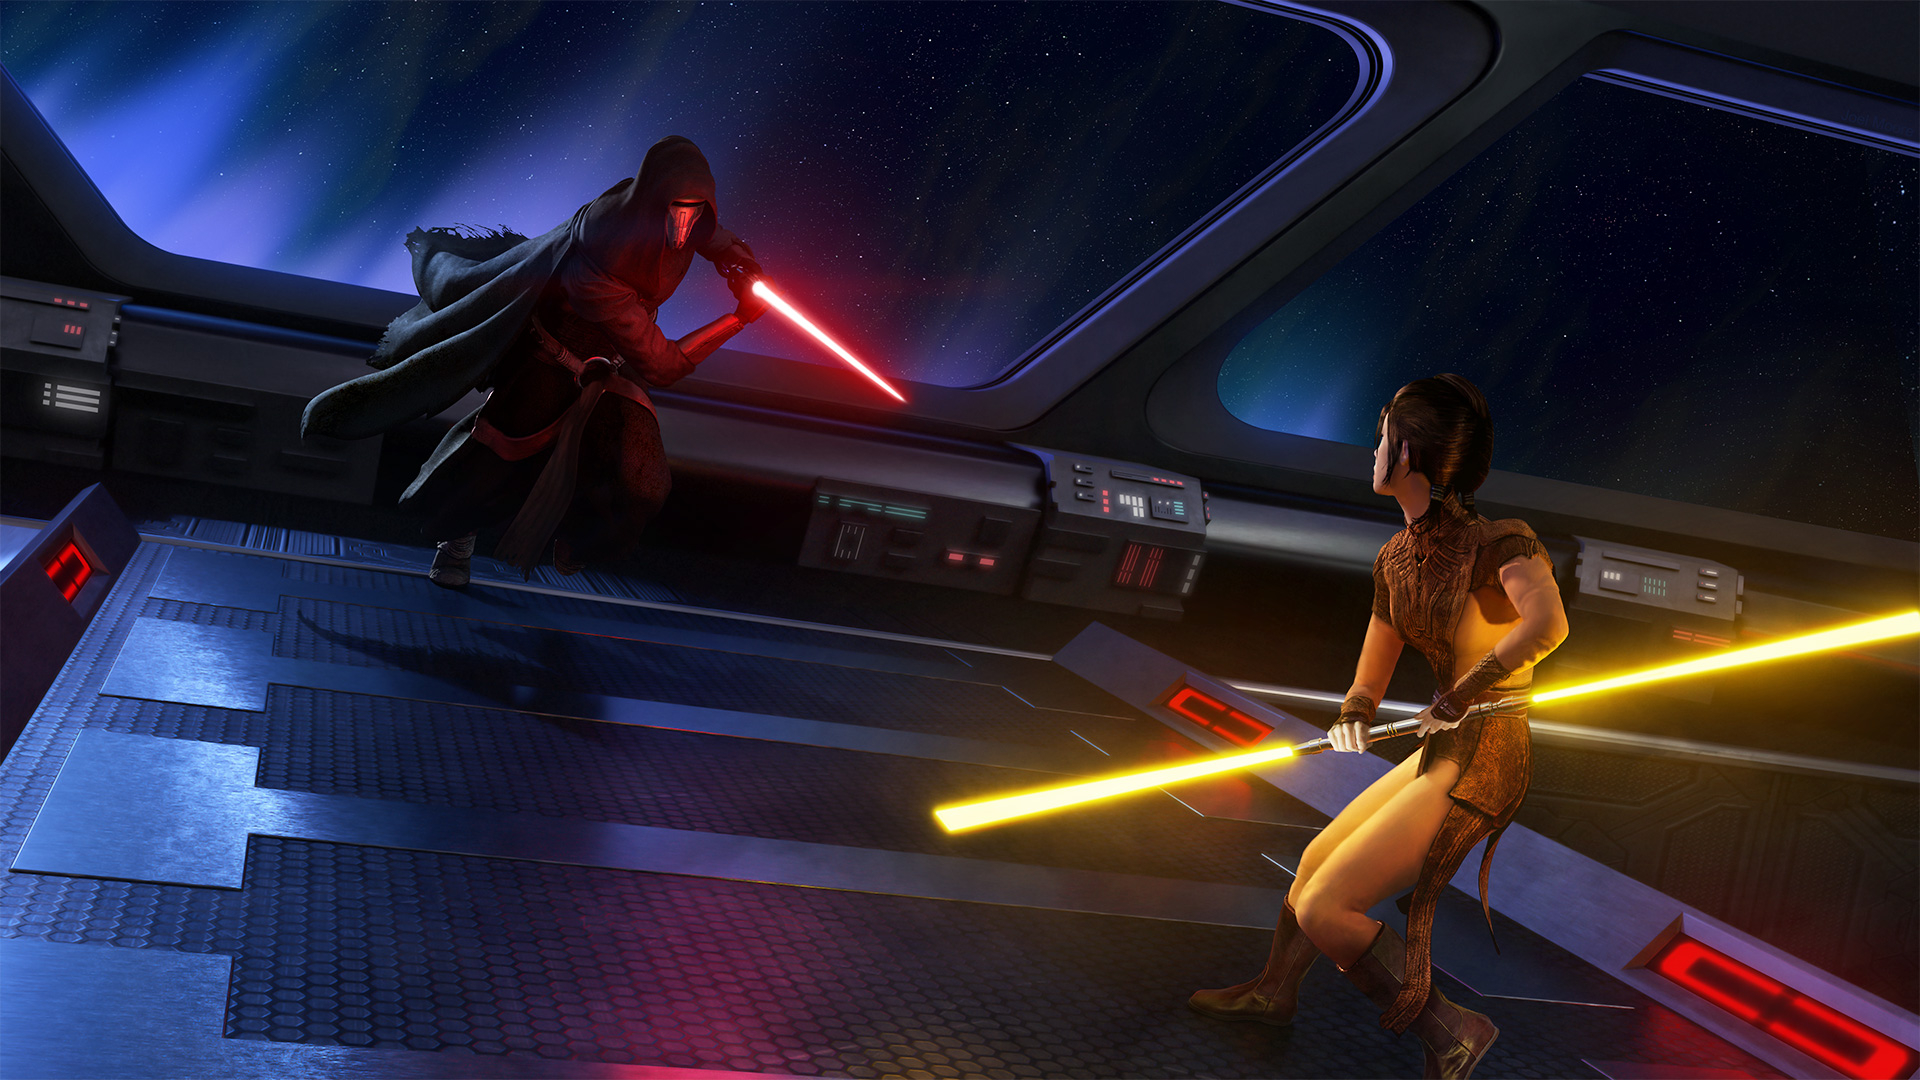 1920x1080 Star Wars Darth Revan Vs Bastila Shan, HD Superheroes, 4k Wallpapers, Images, Backgrounds, Photos and Pictures